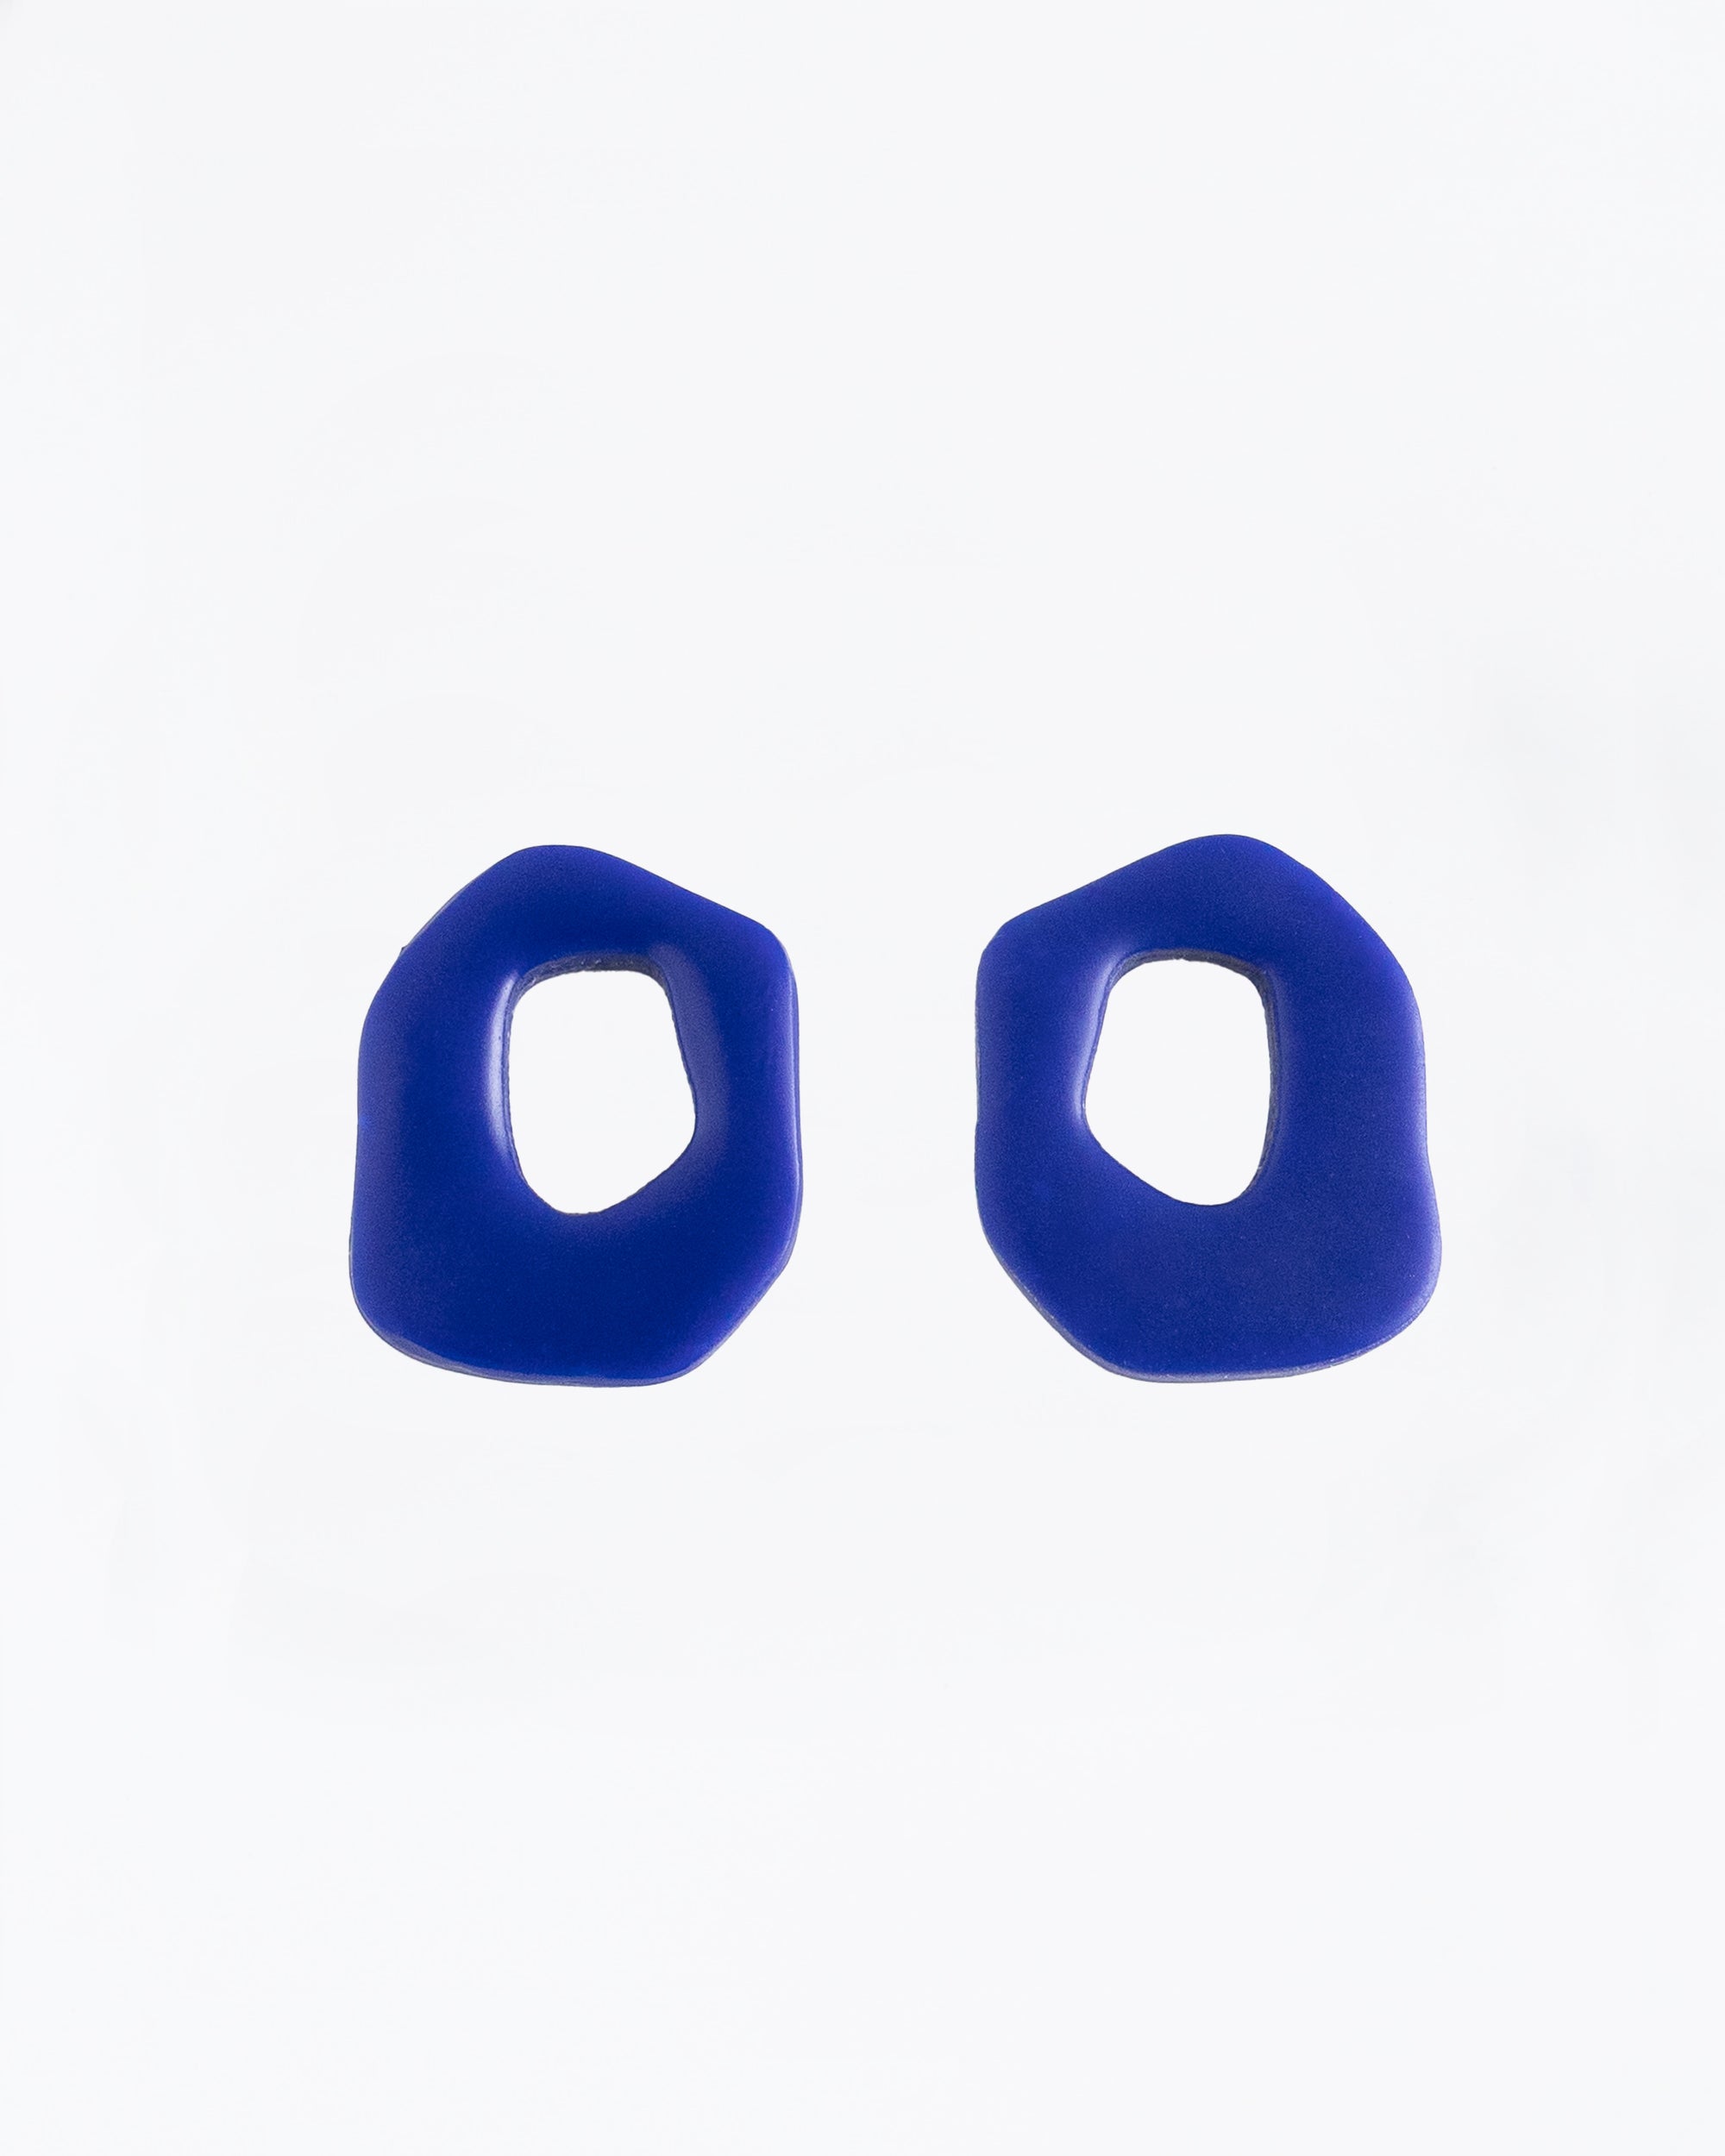 Darien Beads in Hue Blue color, front view